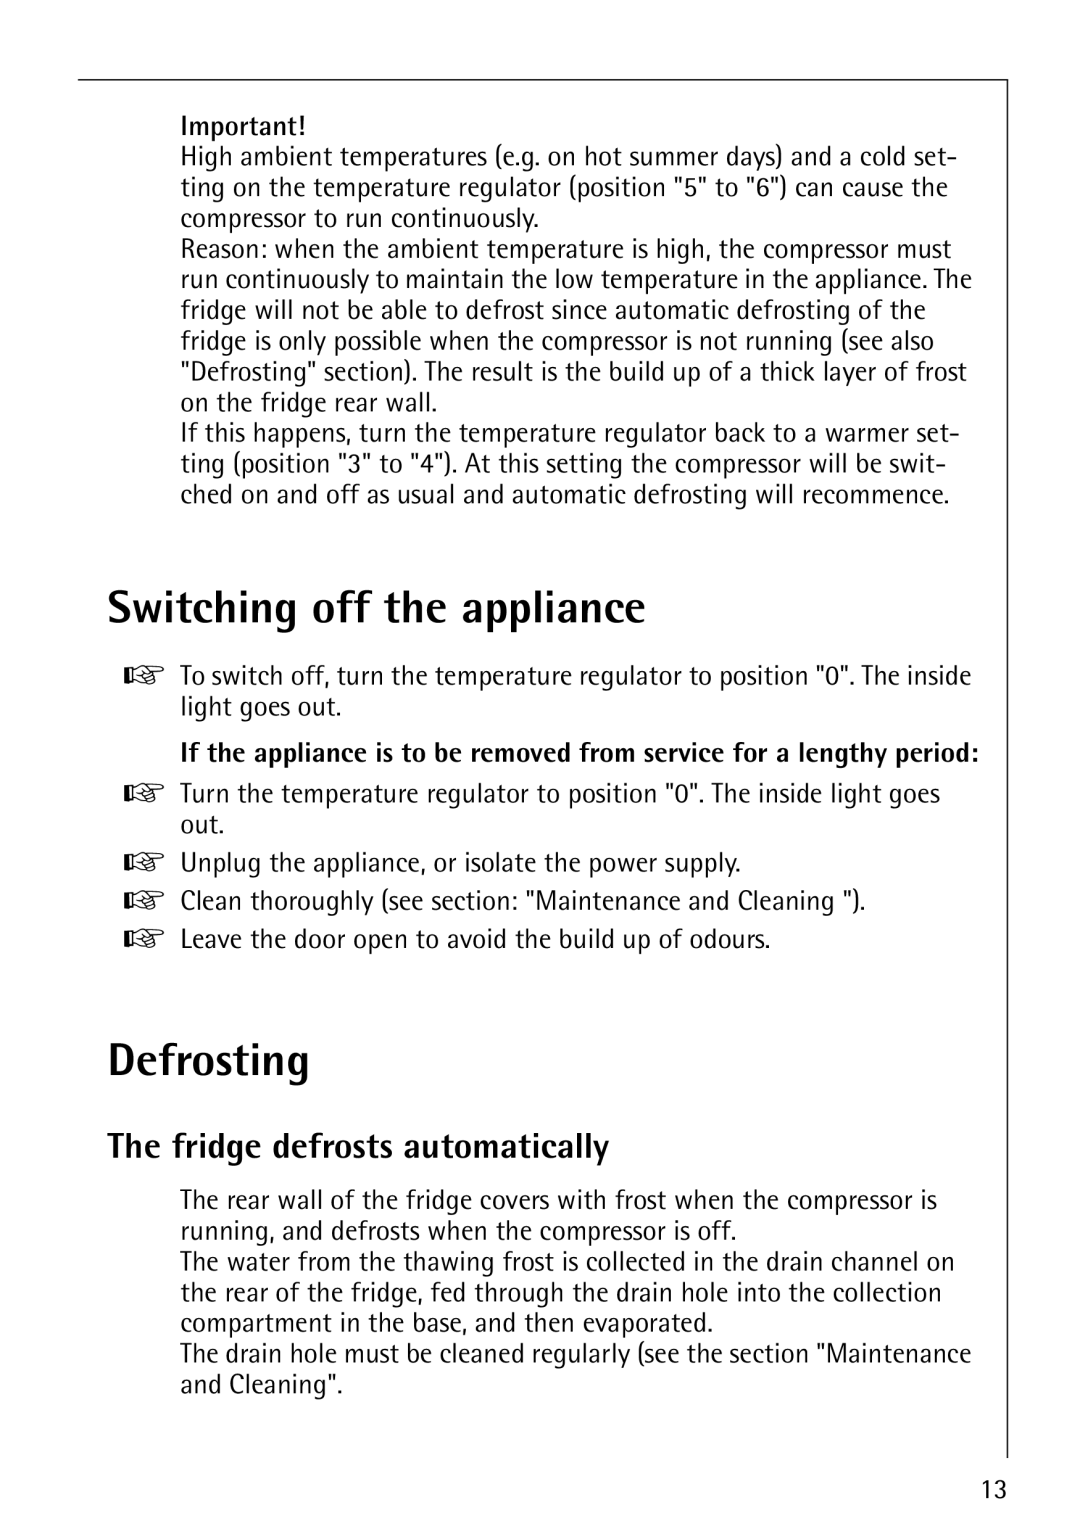 Electrolux Integrated operating instructions Switching off the appliance, Defrosting, The fridge defrosts automatically 